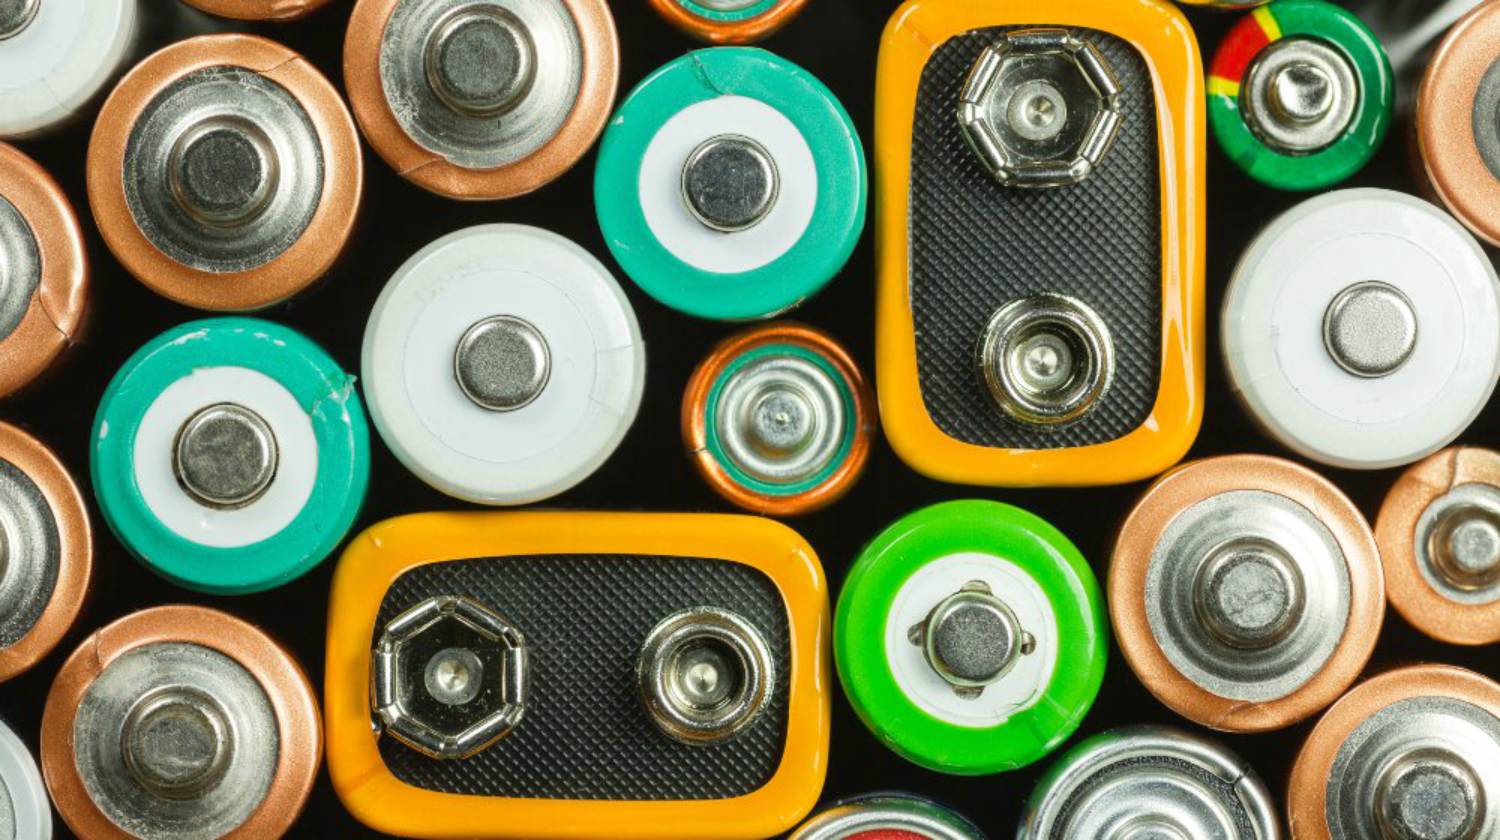 A selection of batteries | Bring Dead Ni-Cad Batteries Back To Life | Prepper Skills | Featured